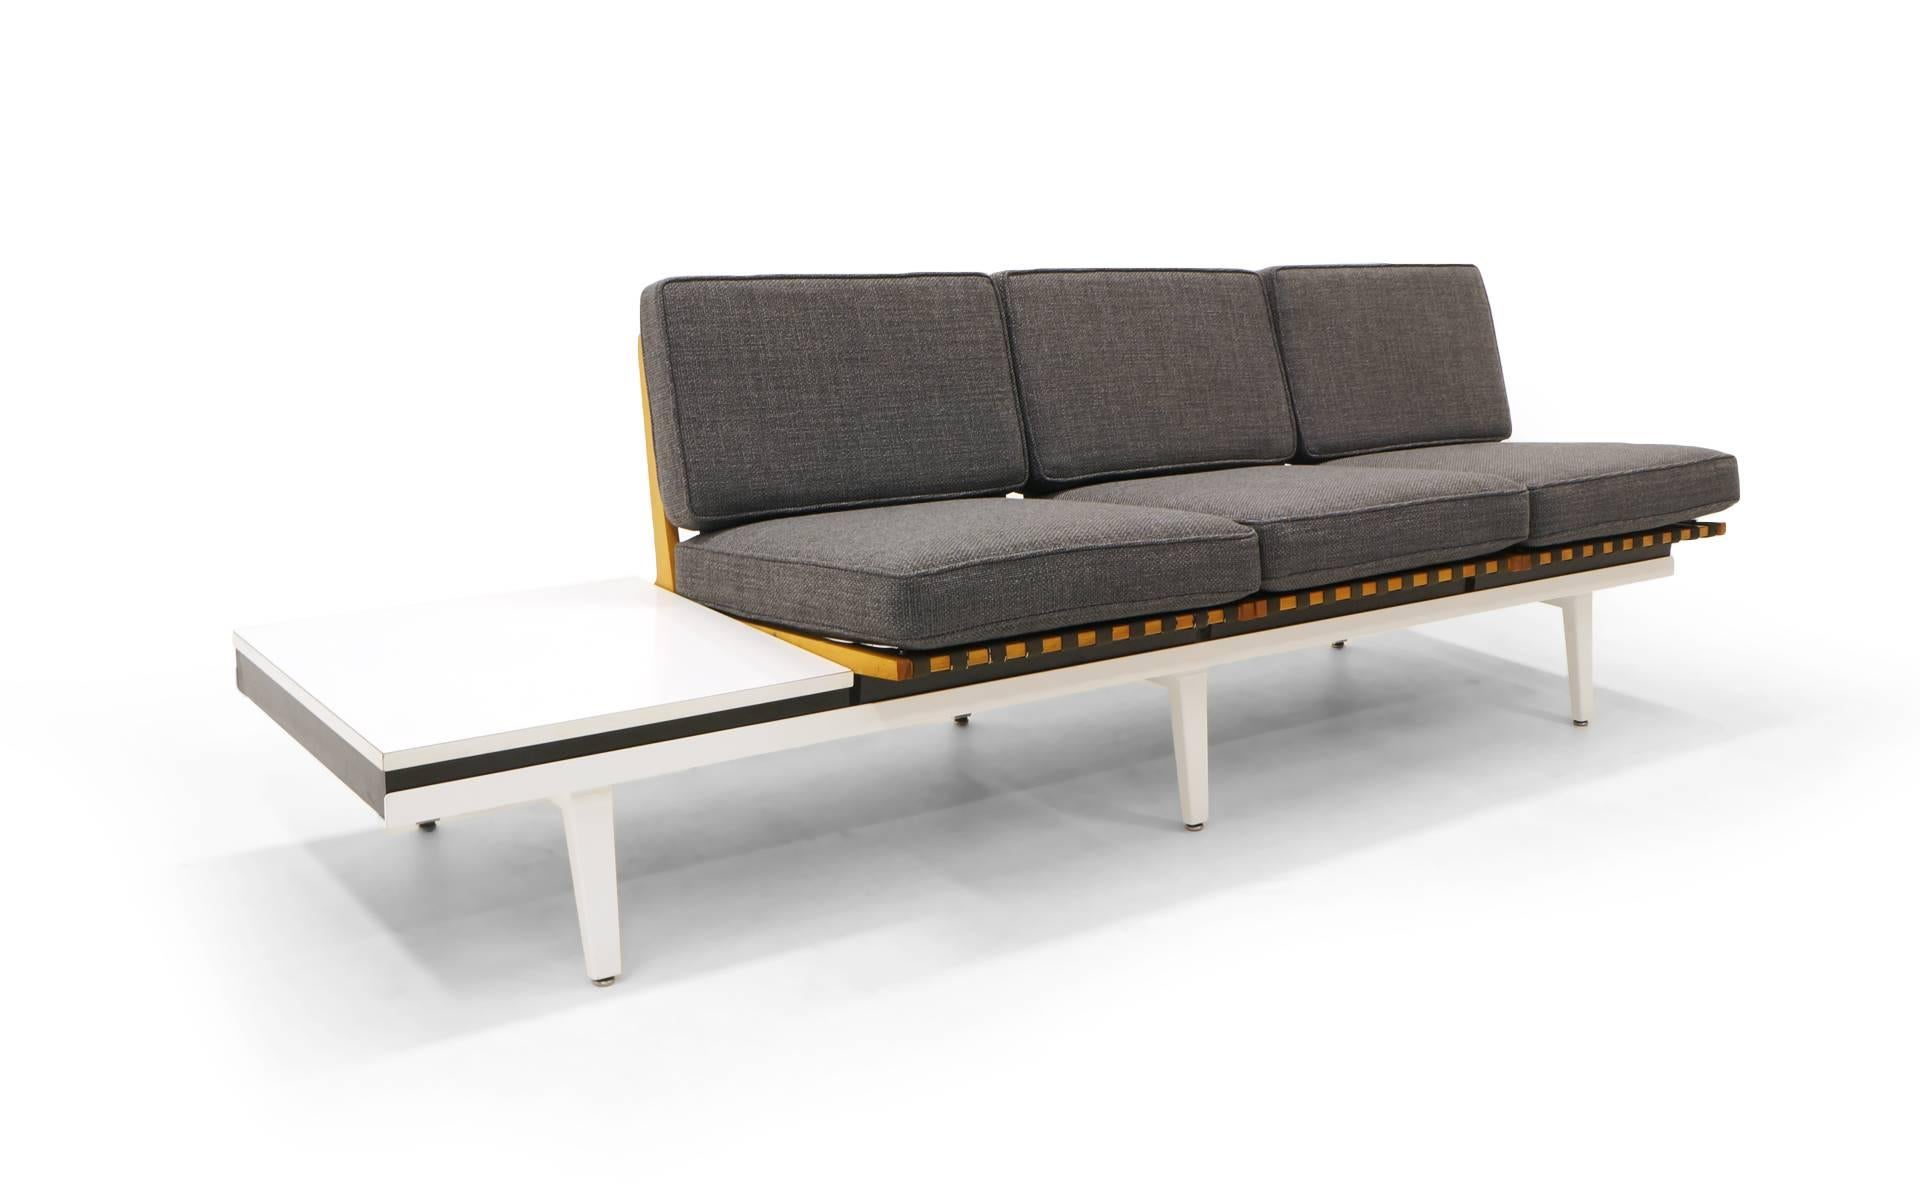 George Nelson Steel Frame Group modular sofa, coffee table and bench. Rare version with the folding birch seat frames. Seats and tables lift out of the frames and can be configured in any number of arrangements. Original white Formica tables tops